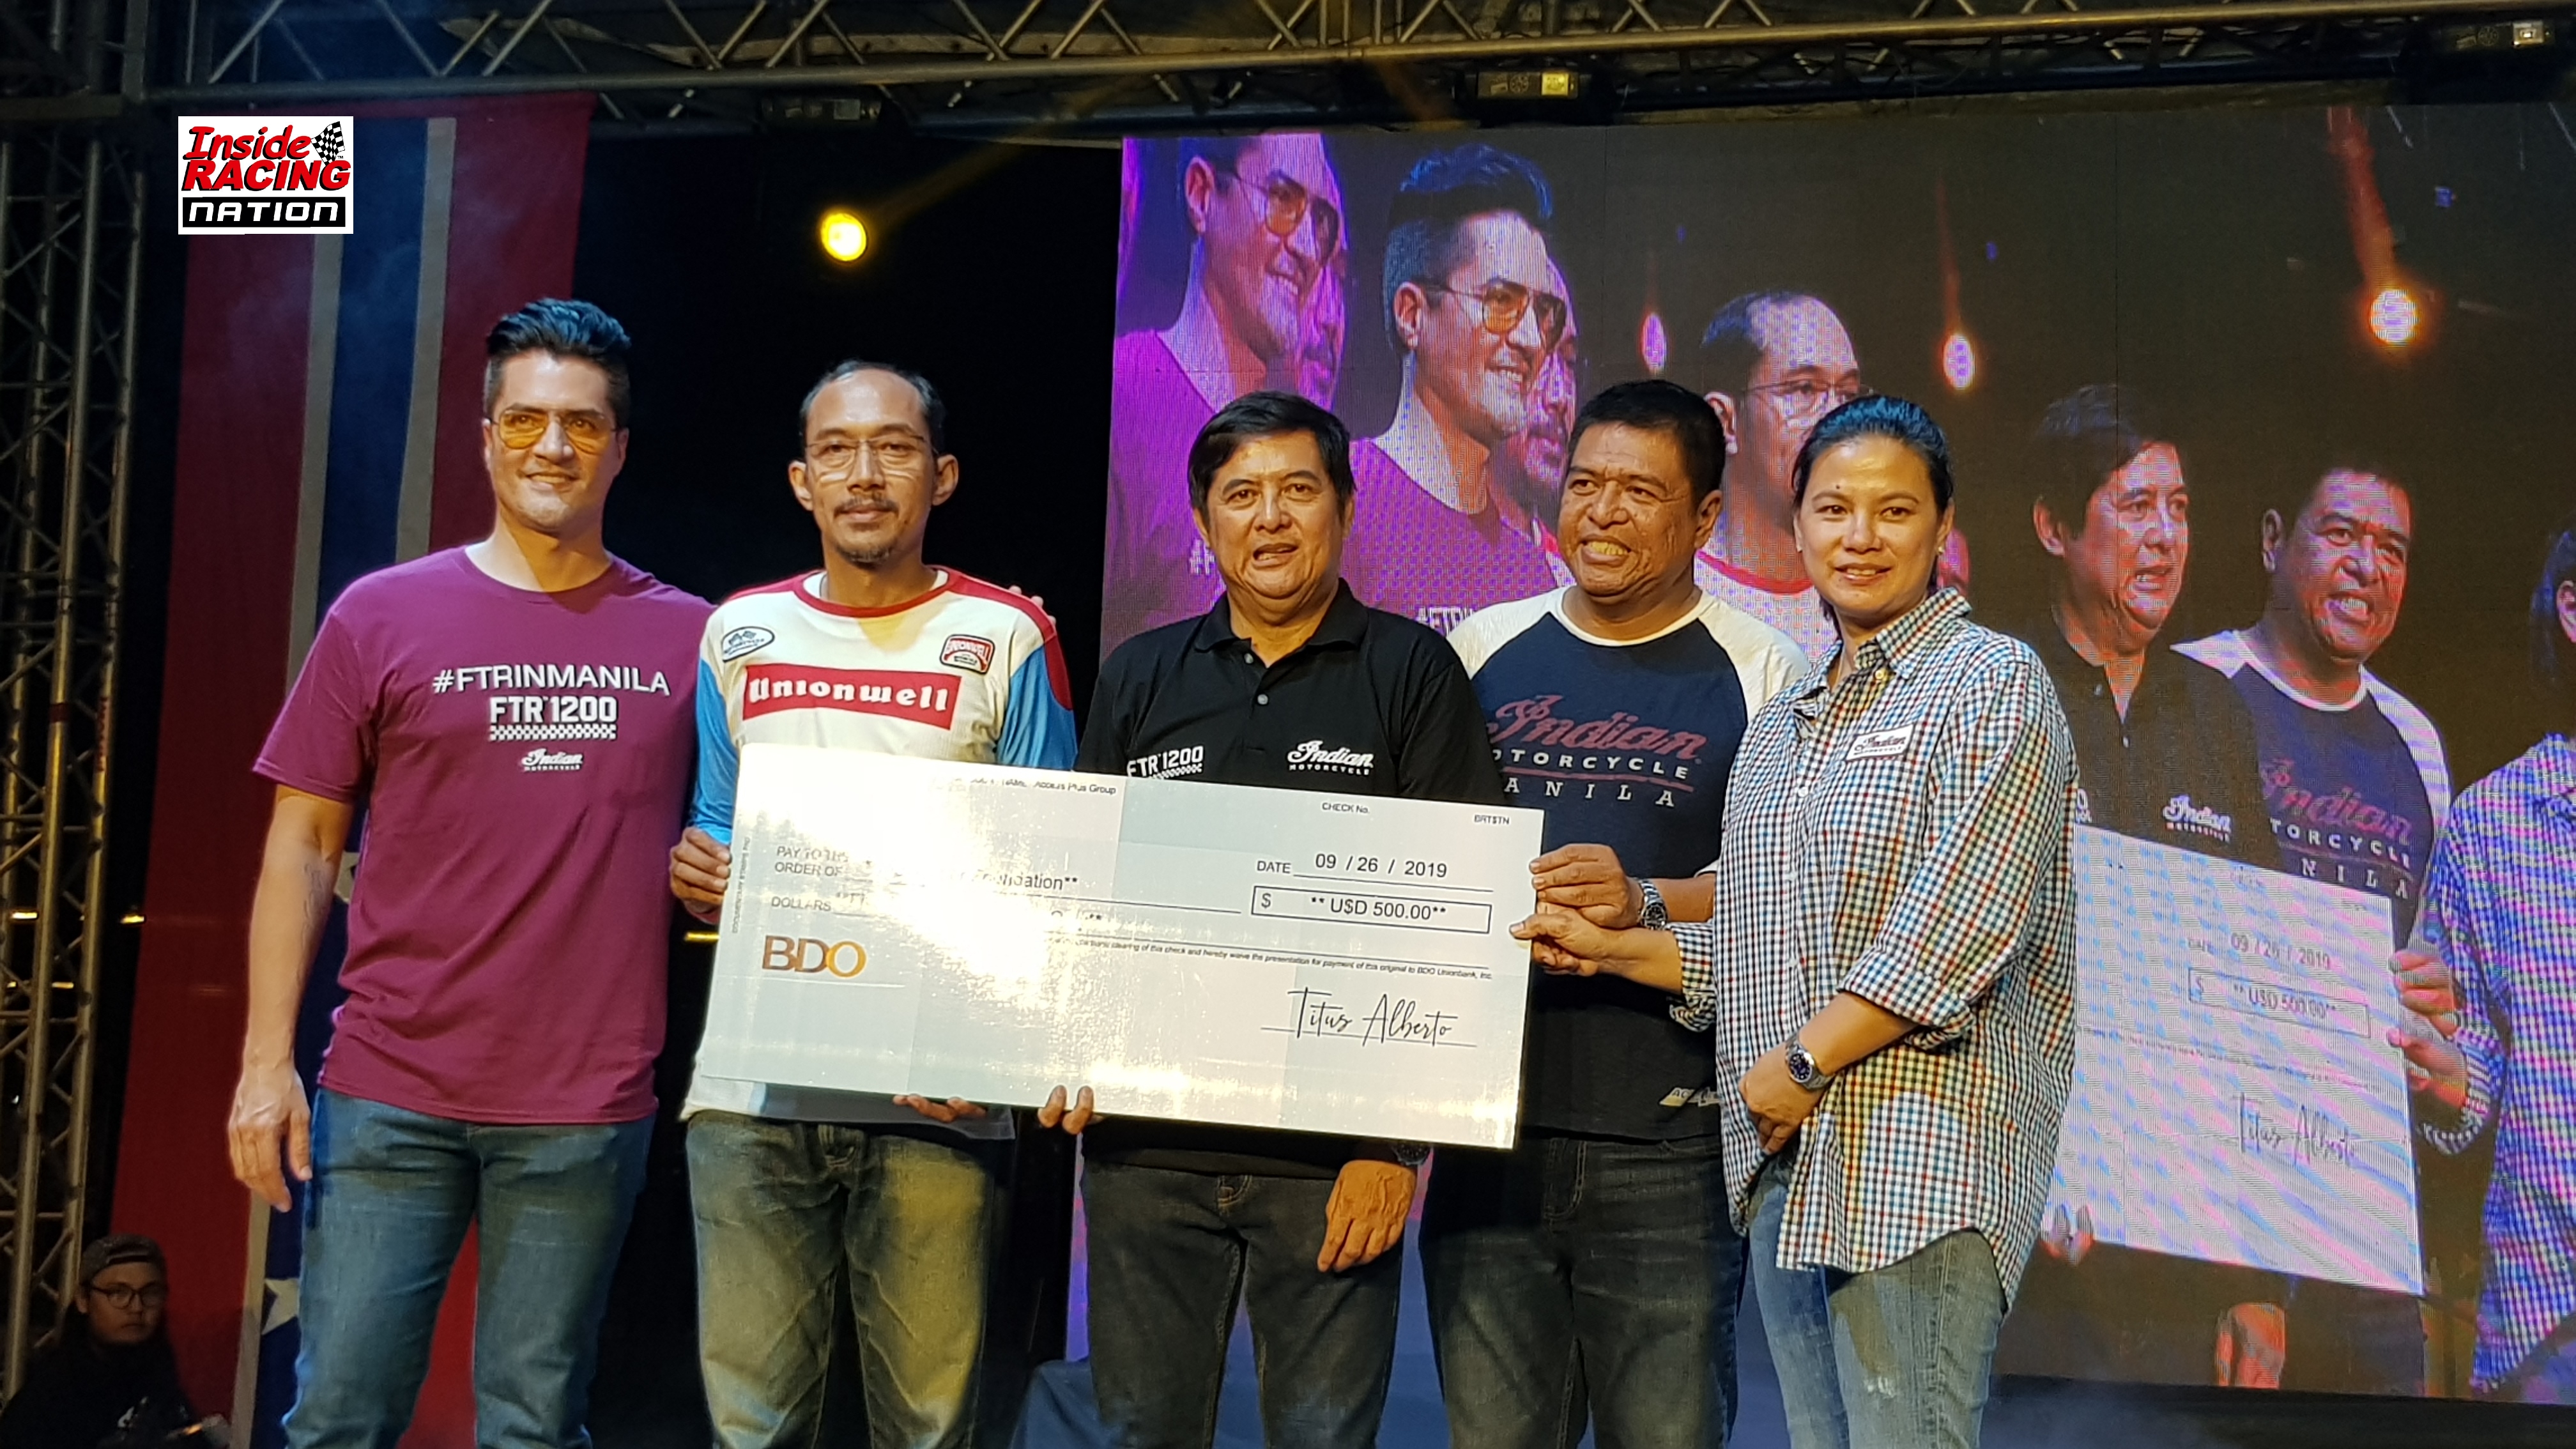 Access Plus donates US500$ to the Distinguished Gentleman's Ride (DGR)